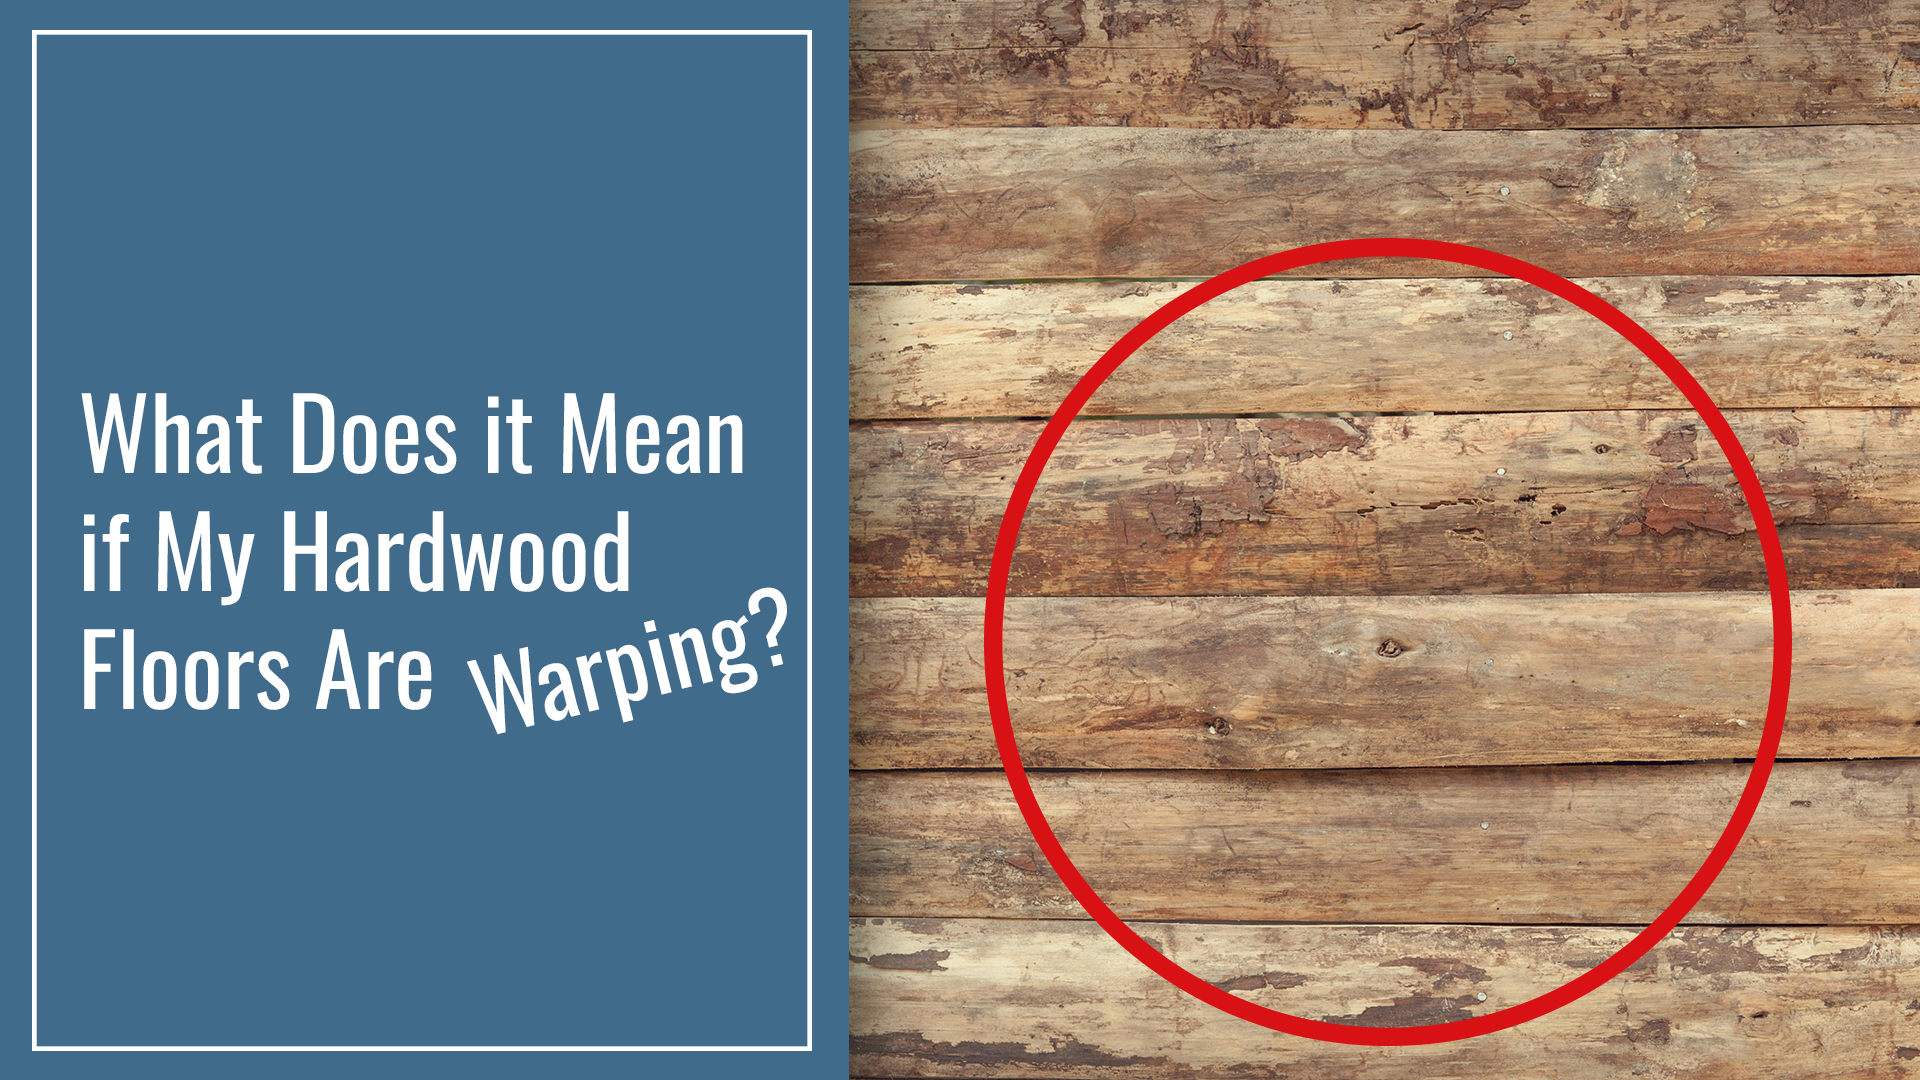 What Does it Mean if My Hardwood Floors Are Warping?